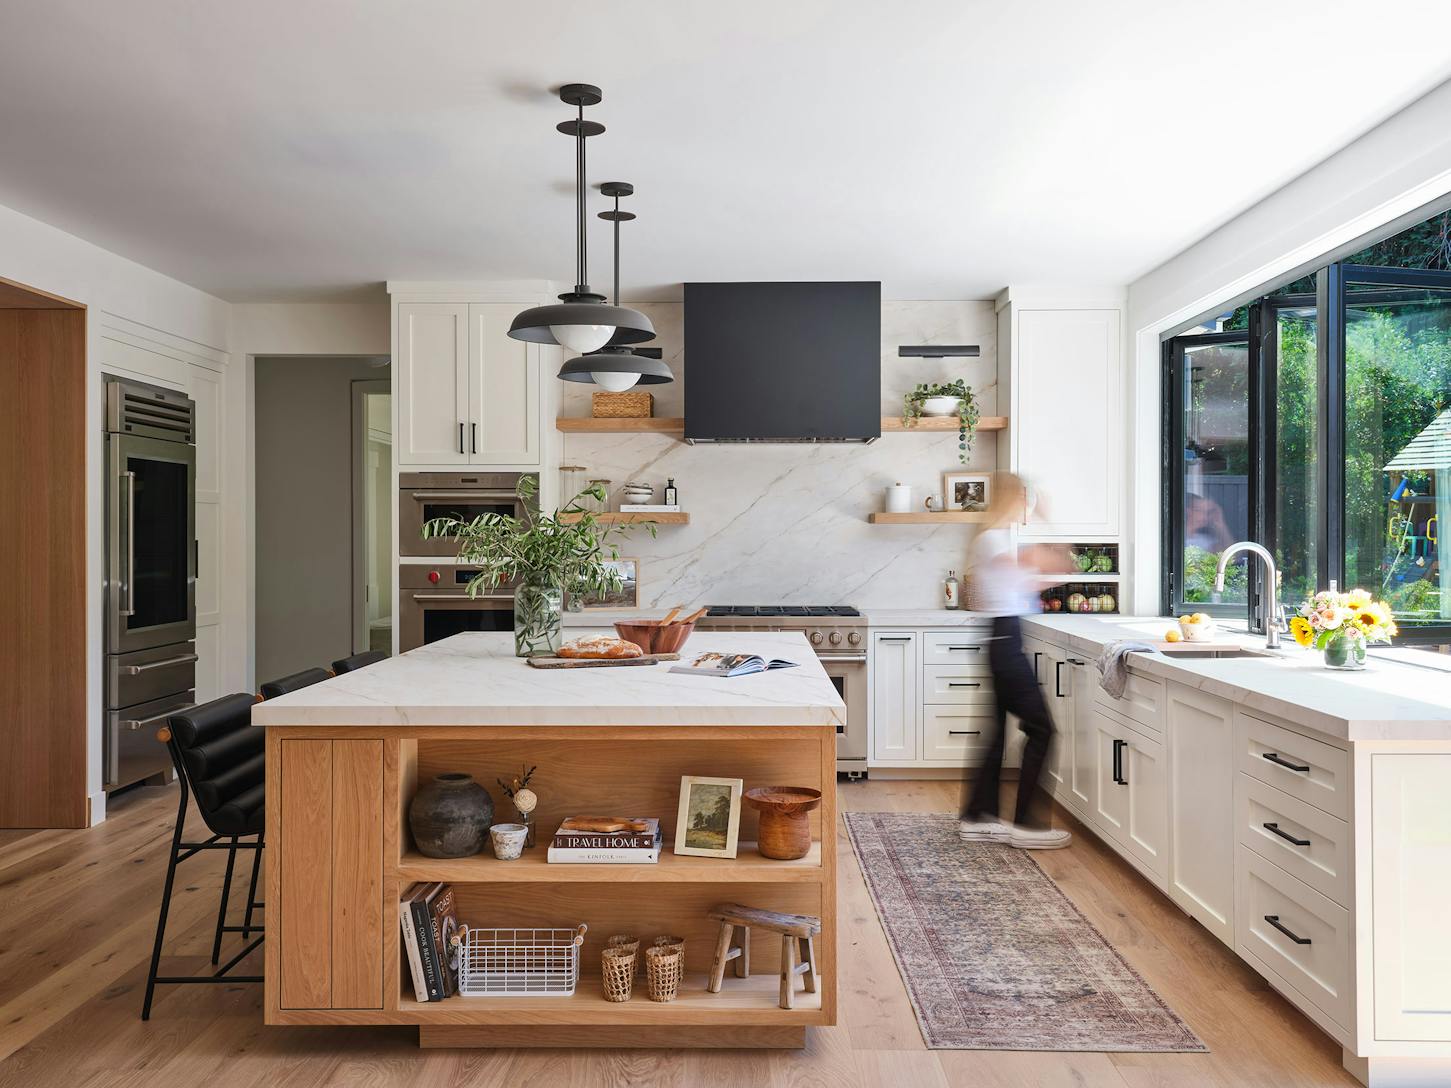 A modern kitchen with a center island, and a window/door combination designed for indoor outdoor open space